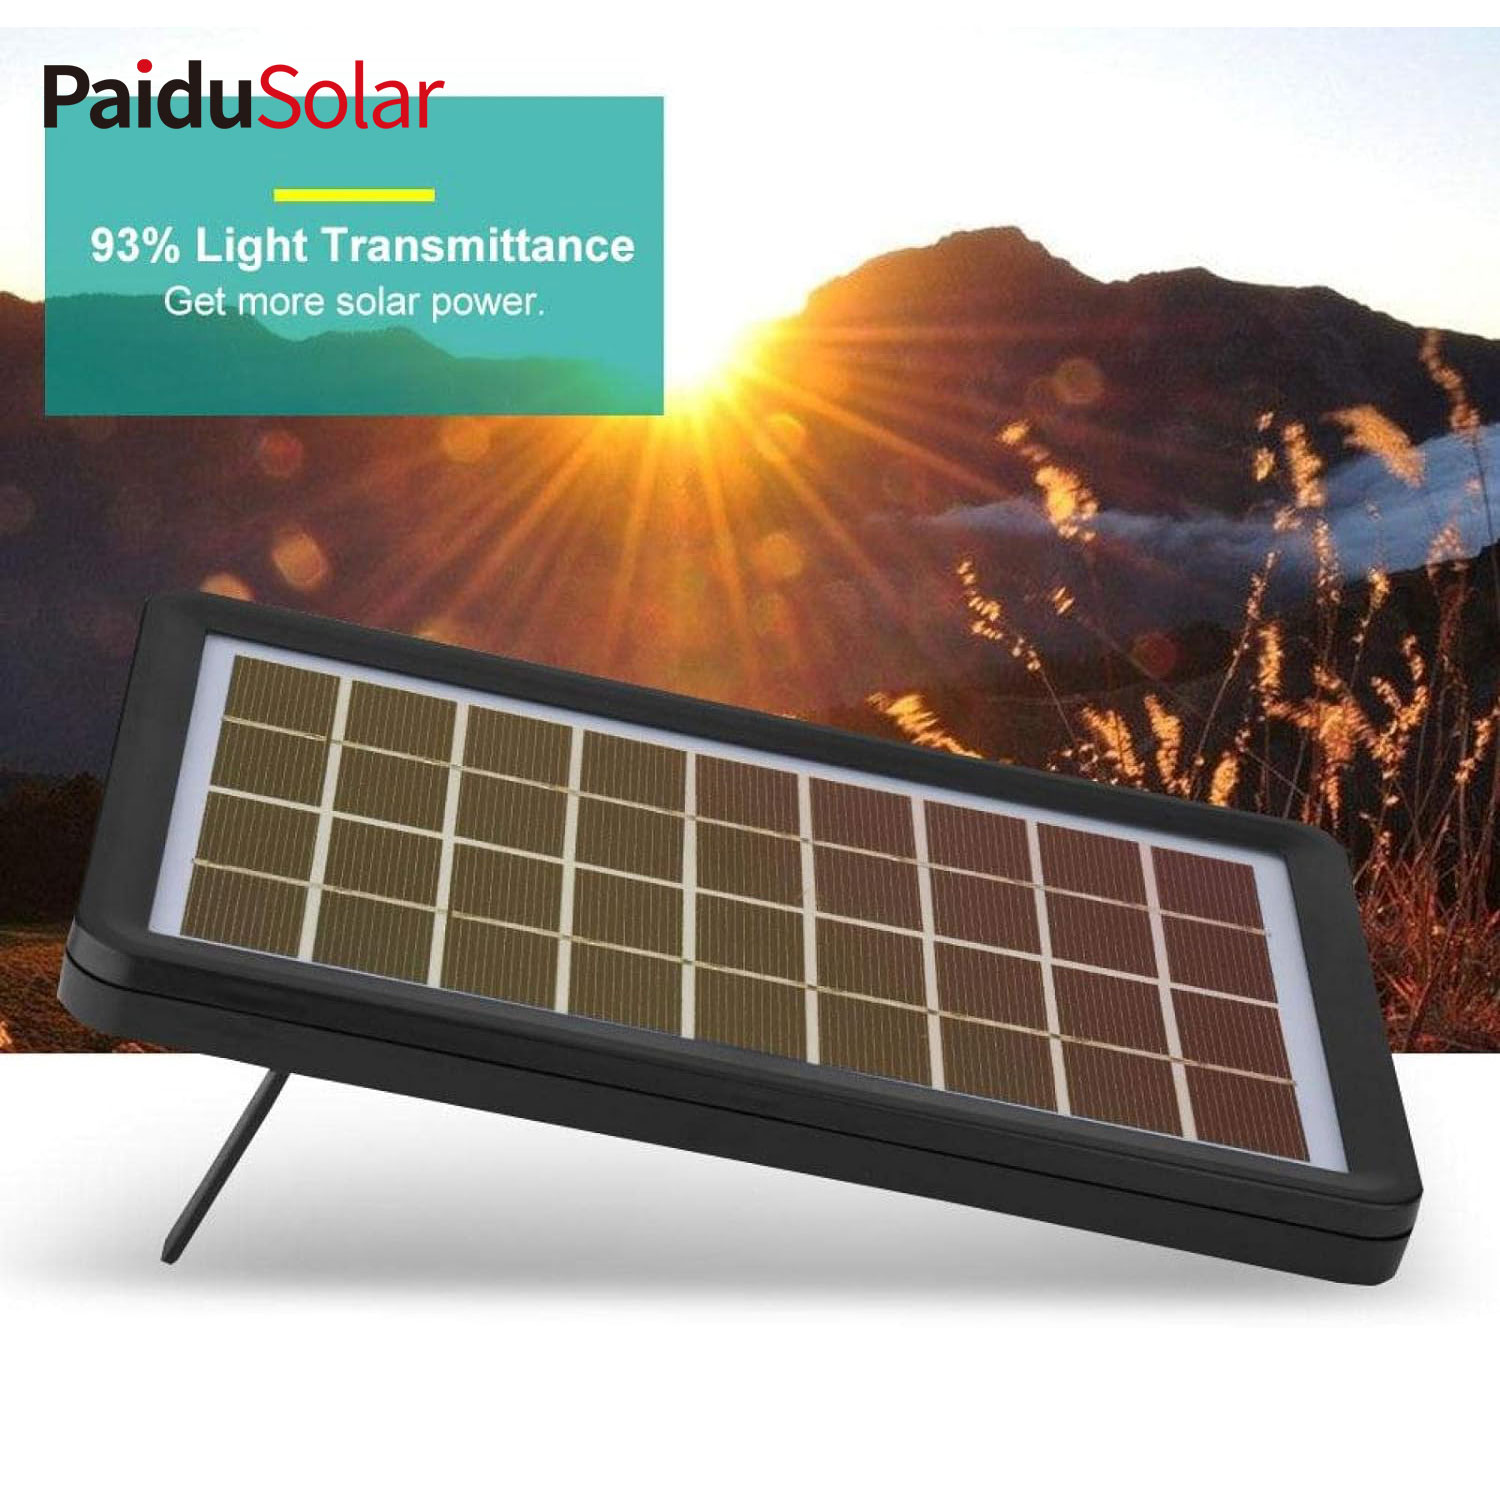 PaiduSolar 9V 3W Poly Silicon Solar Panel Solar Cell For Battery Charging Boat_9mh7